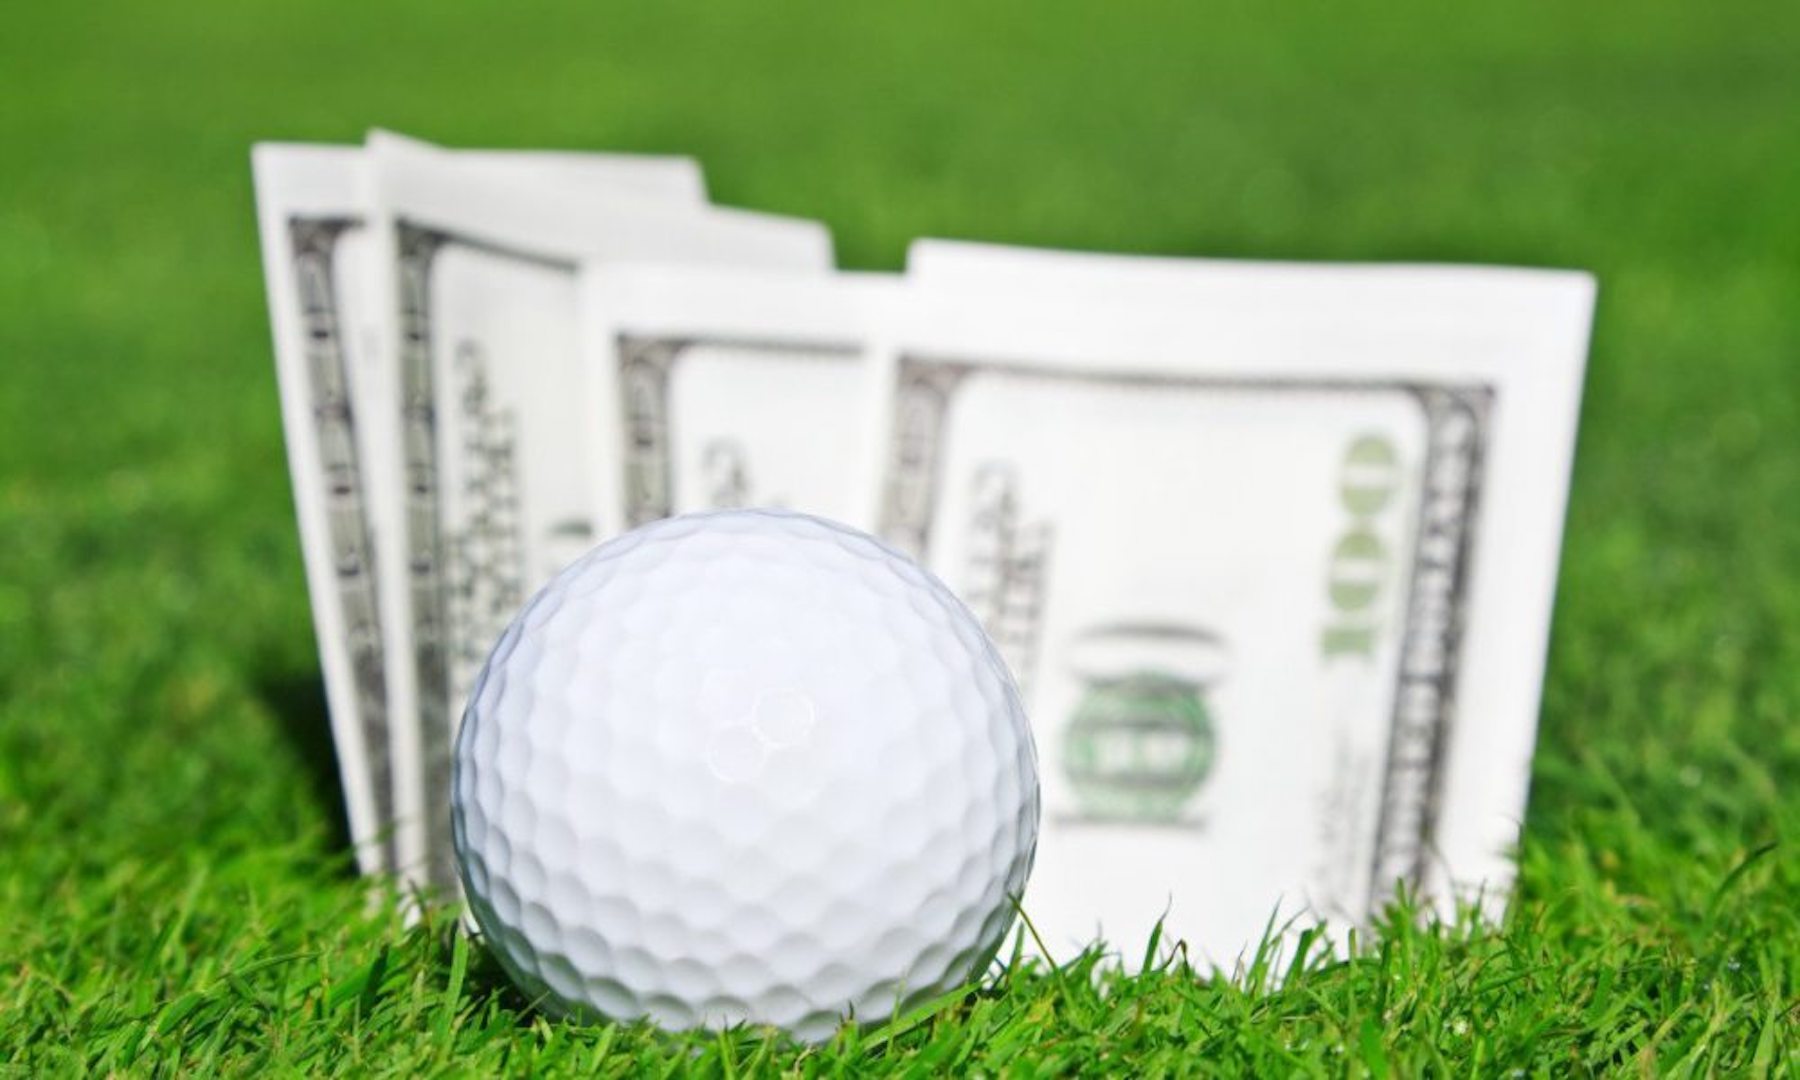 A Guide to Golf Betting